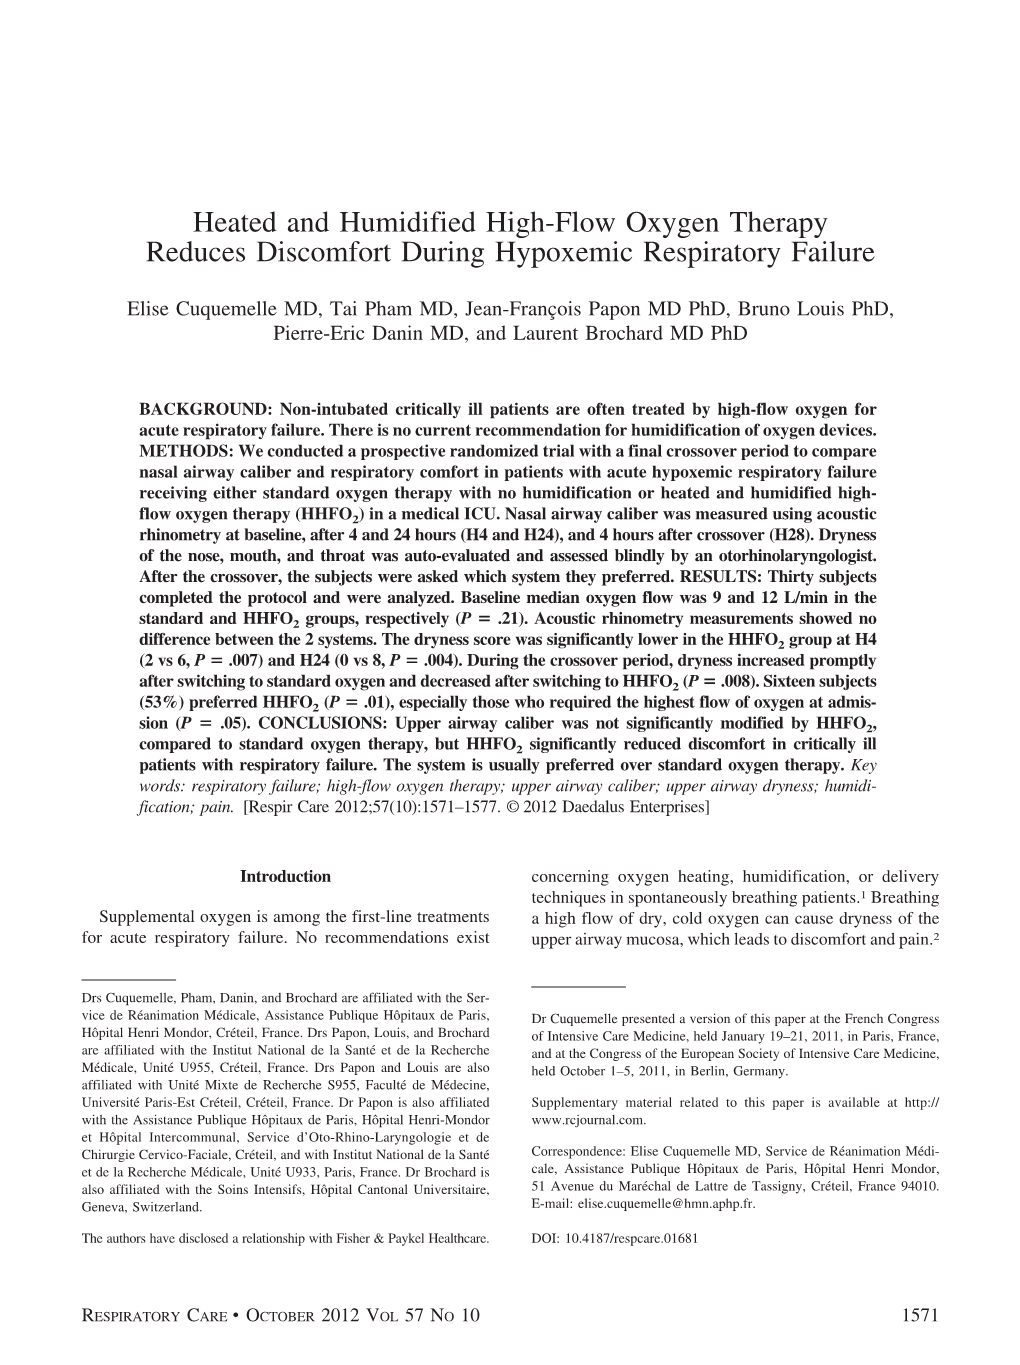 Heated and Humidified High-Flow Oxygen Therapy Reduces Discomfort During Hypoxemic Respiratory Failure